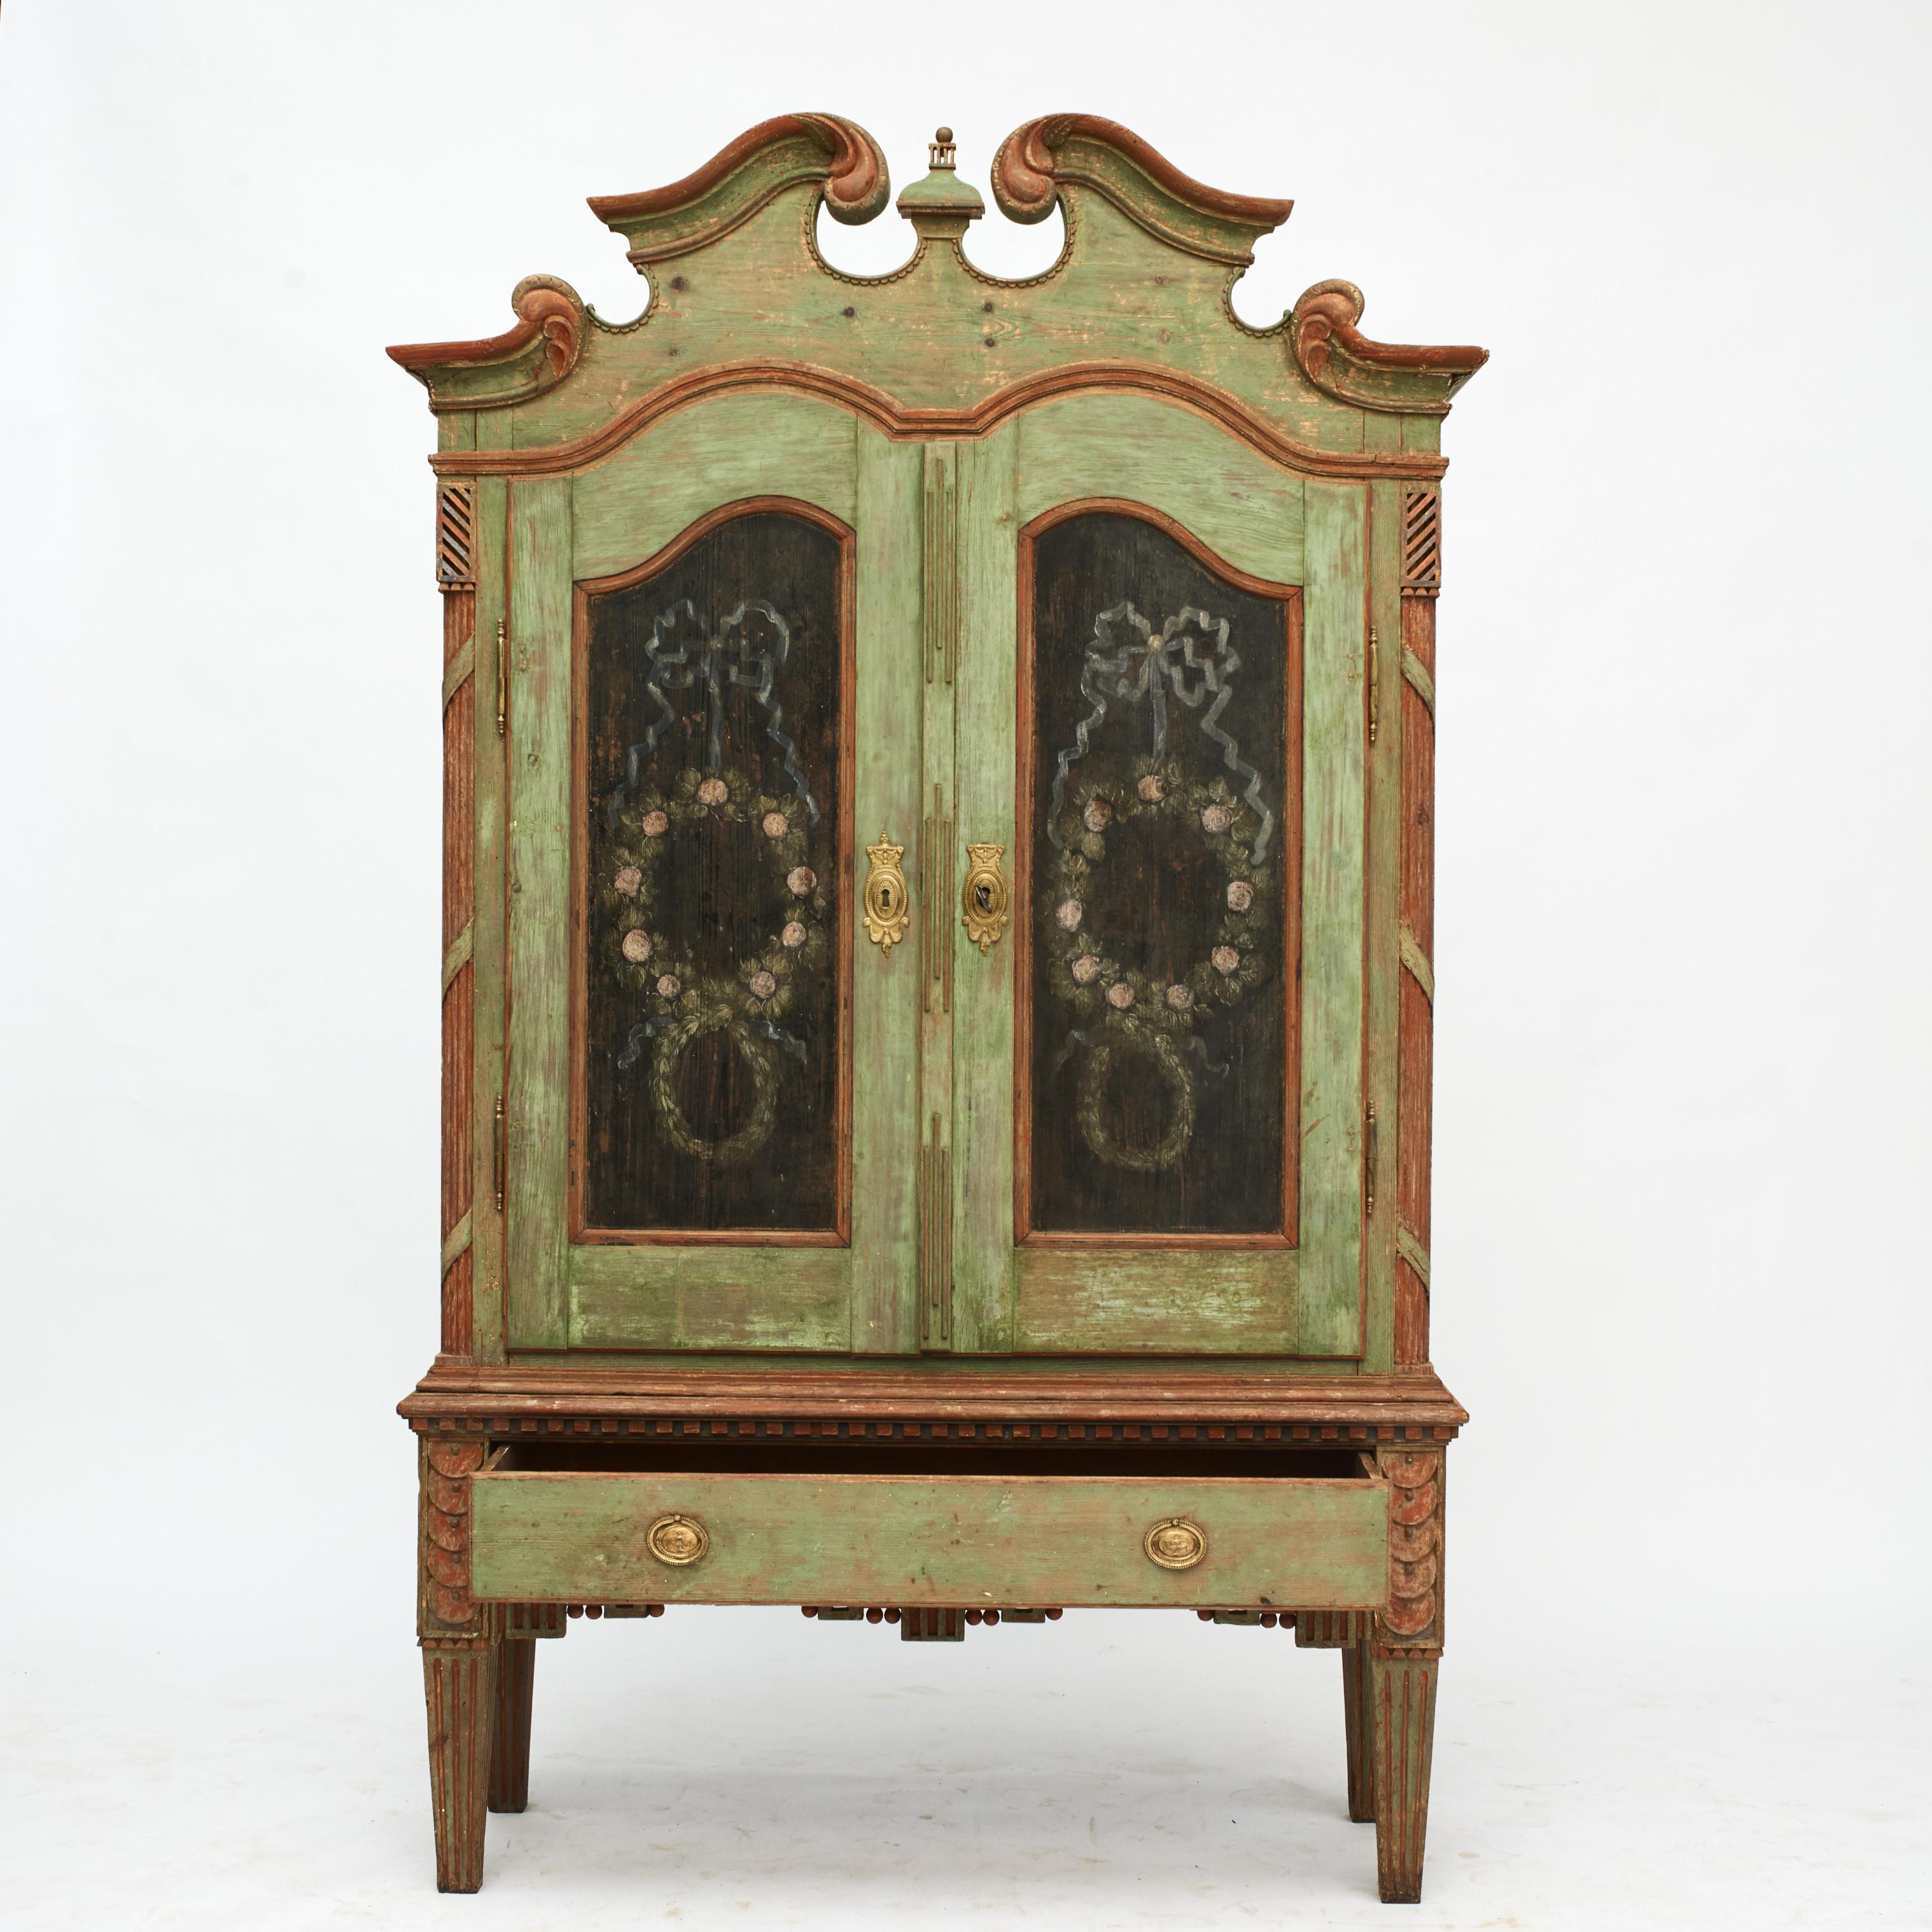 Danish Louis XVI cabinet with original paint in soft-hued polychrome colors.
Doors with two main panels depicting flowers and ribbons on a black base.
Many nicely carved details throughout, including a scroll pediment top, pair of fluted quarter